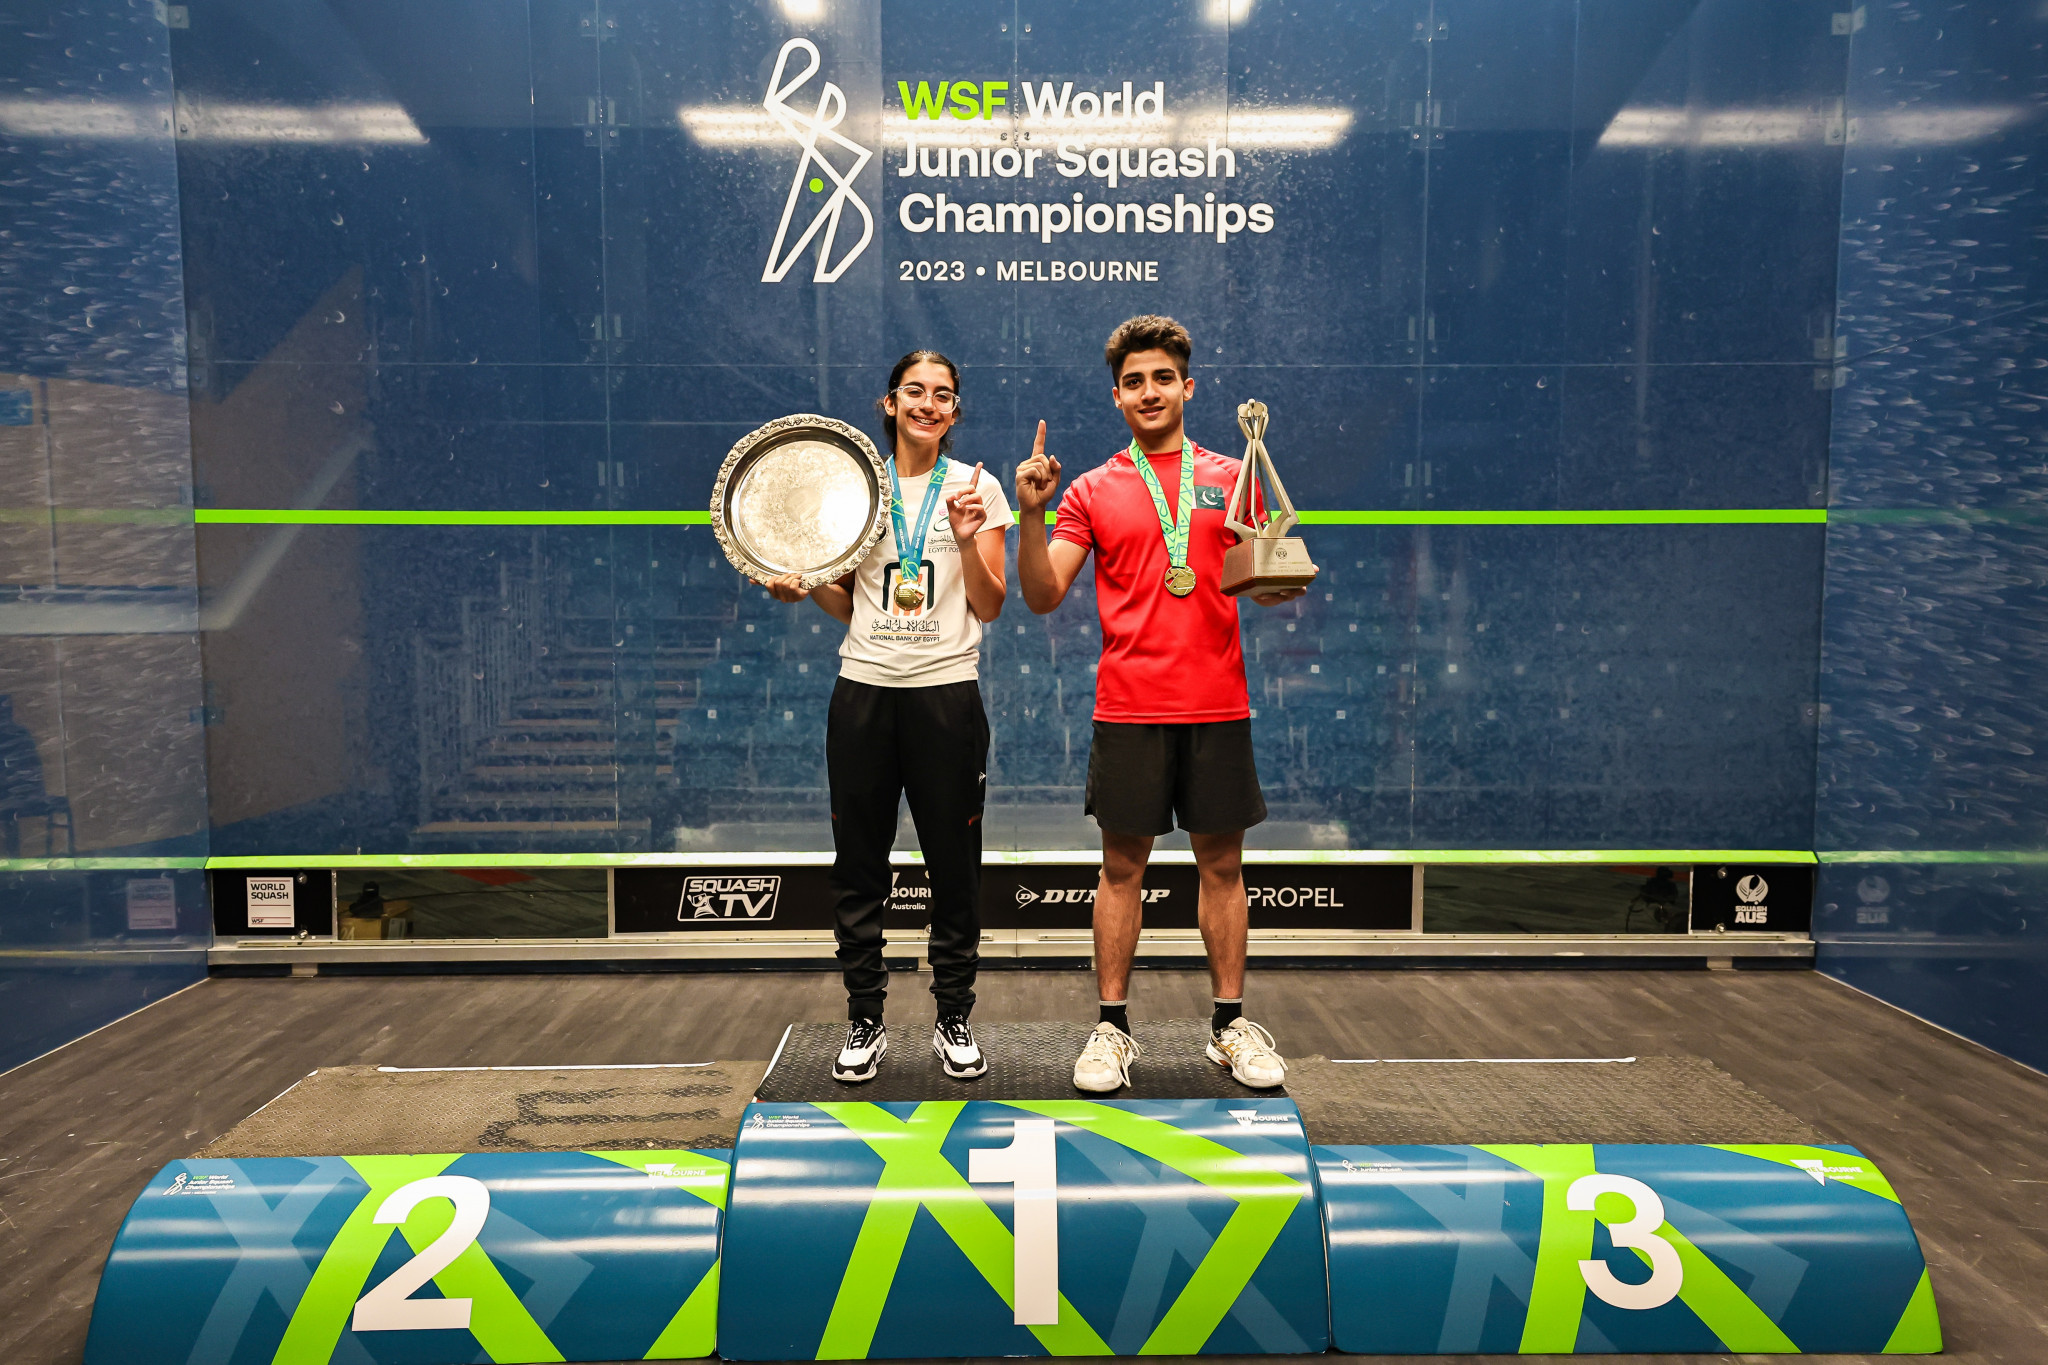 Egypt’s Amina Orfi, left, and Pakistan's Hamza Khan, right, won the respective women's and men's singles titles in Melbourne ©WSF